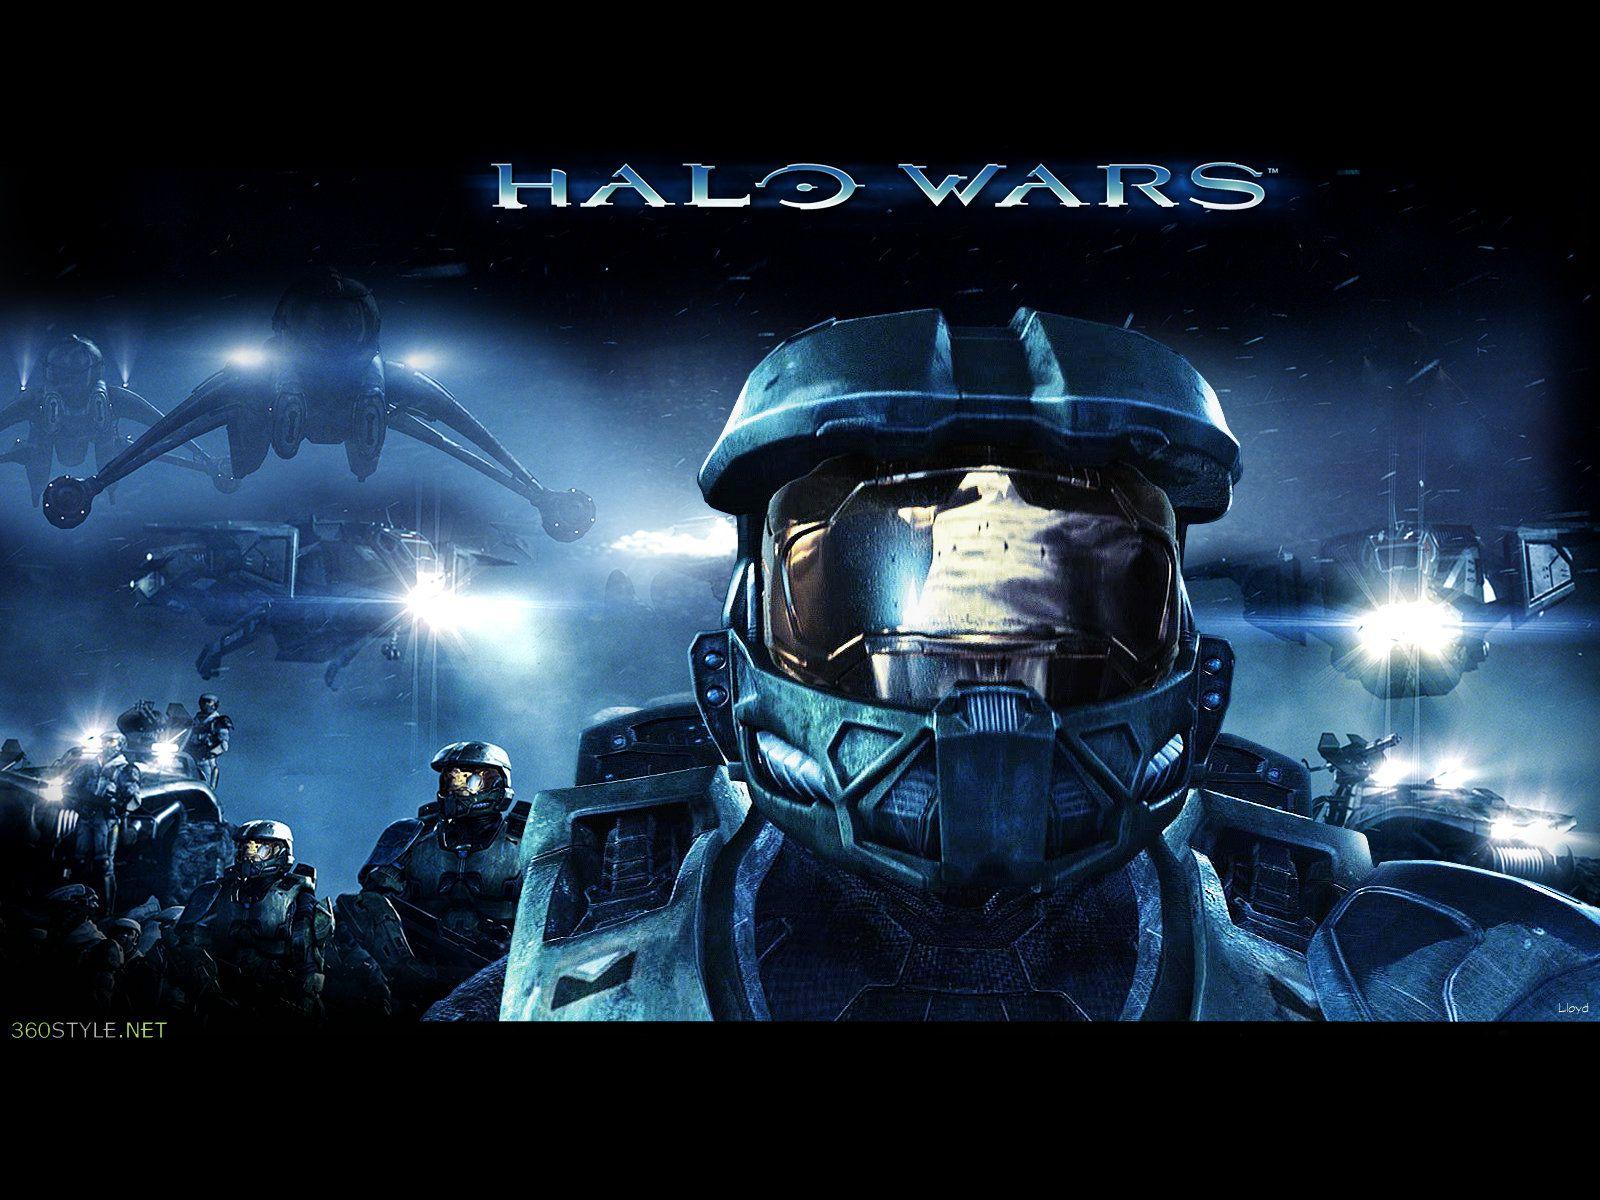 Games Halo Wars Xbox 360 Game wallpapers